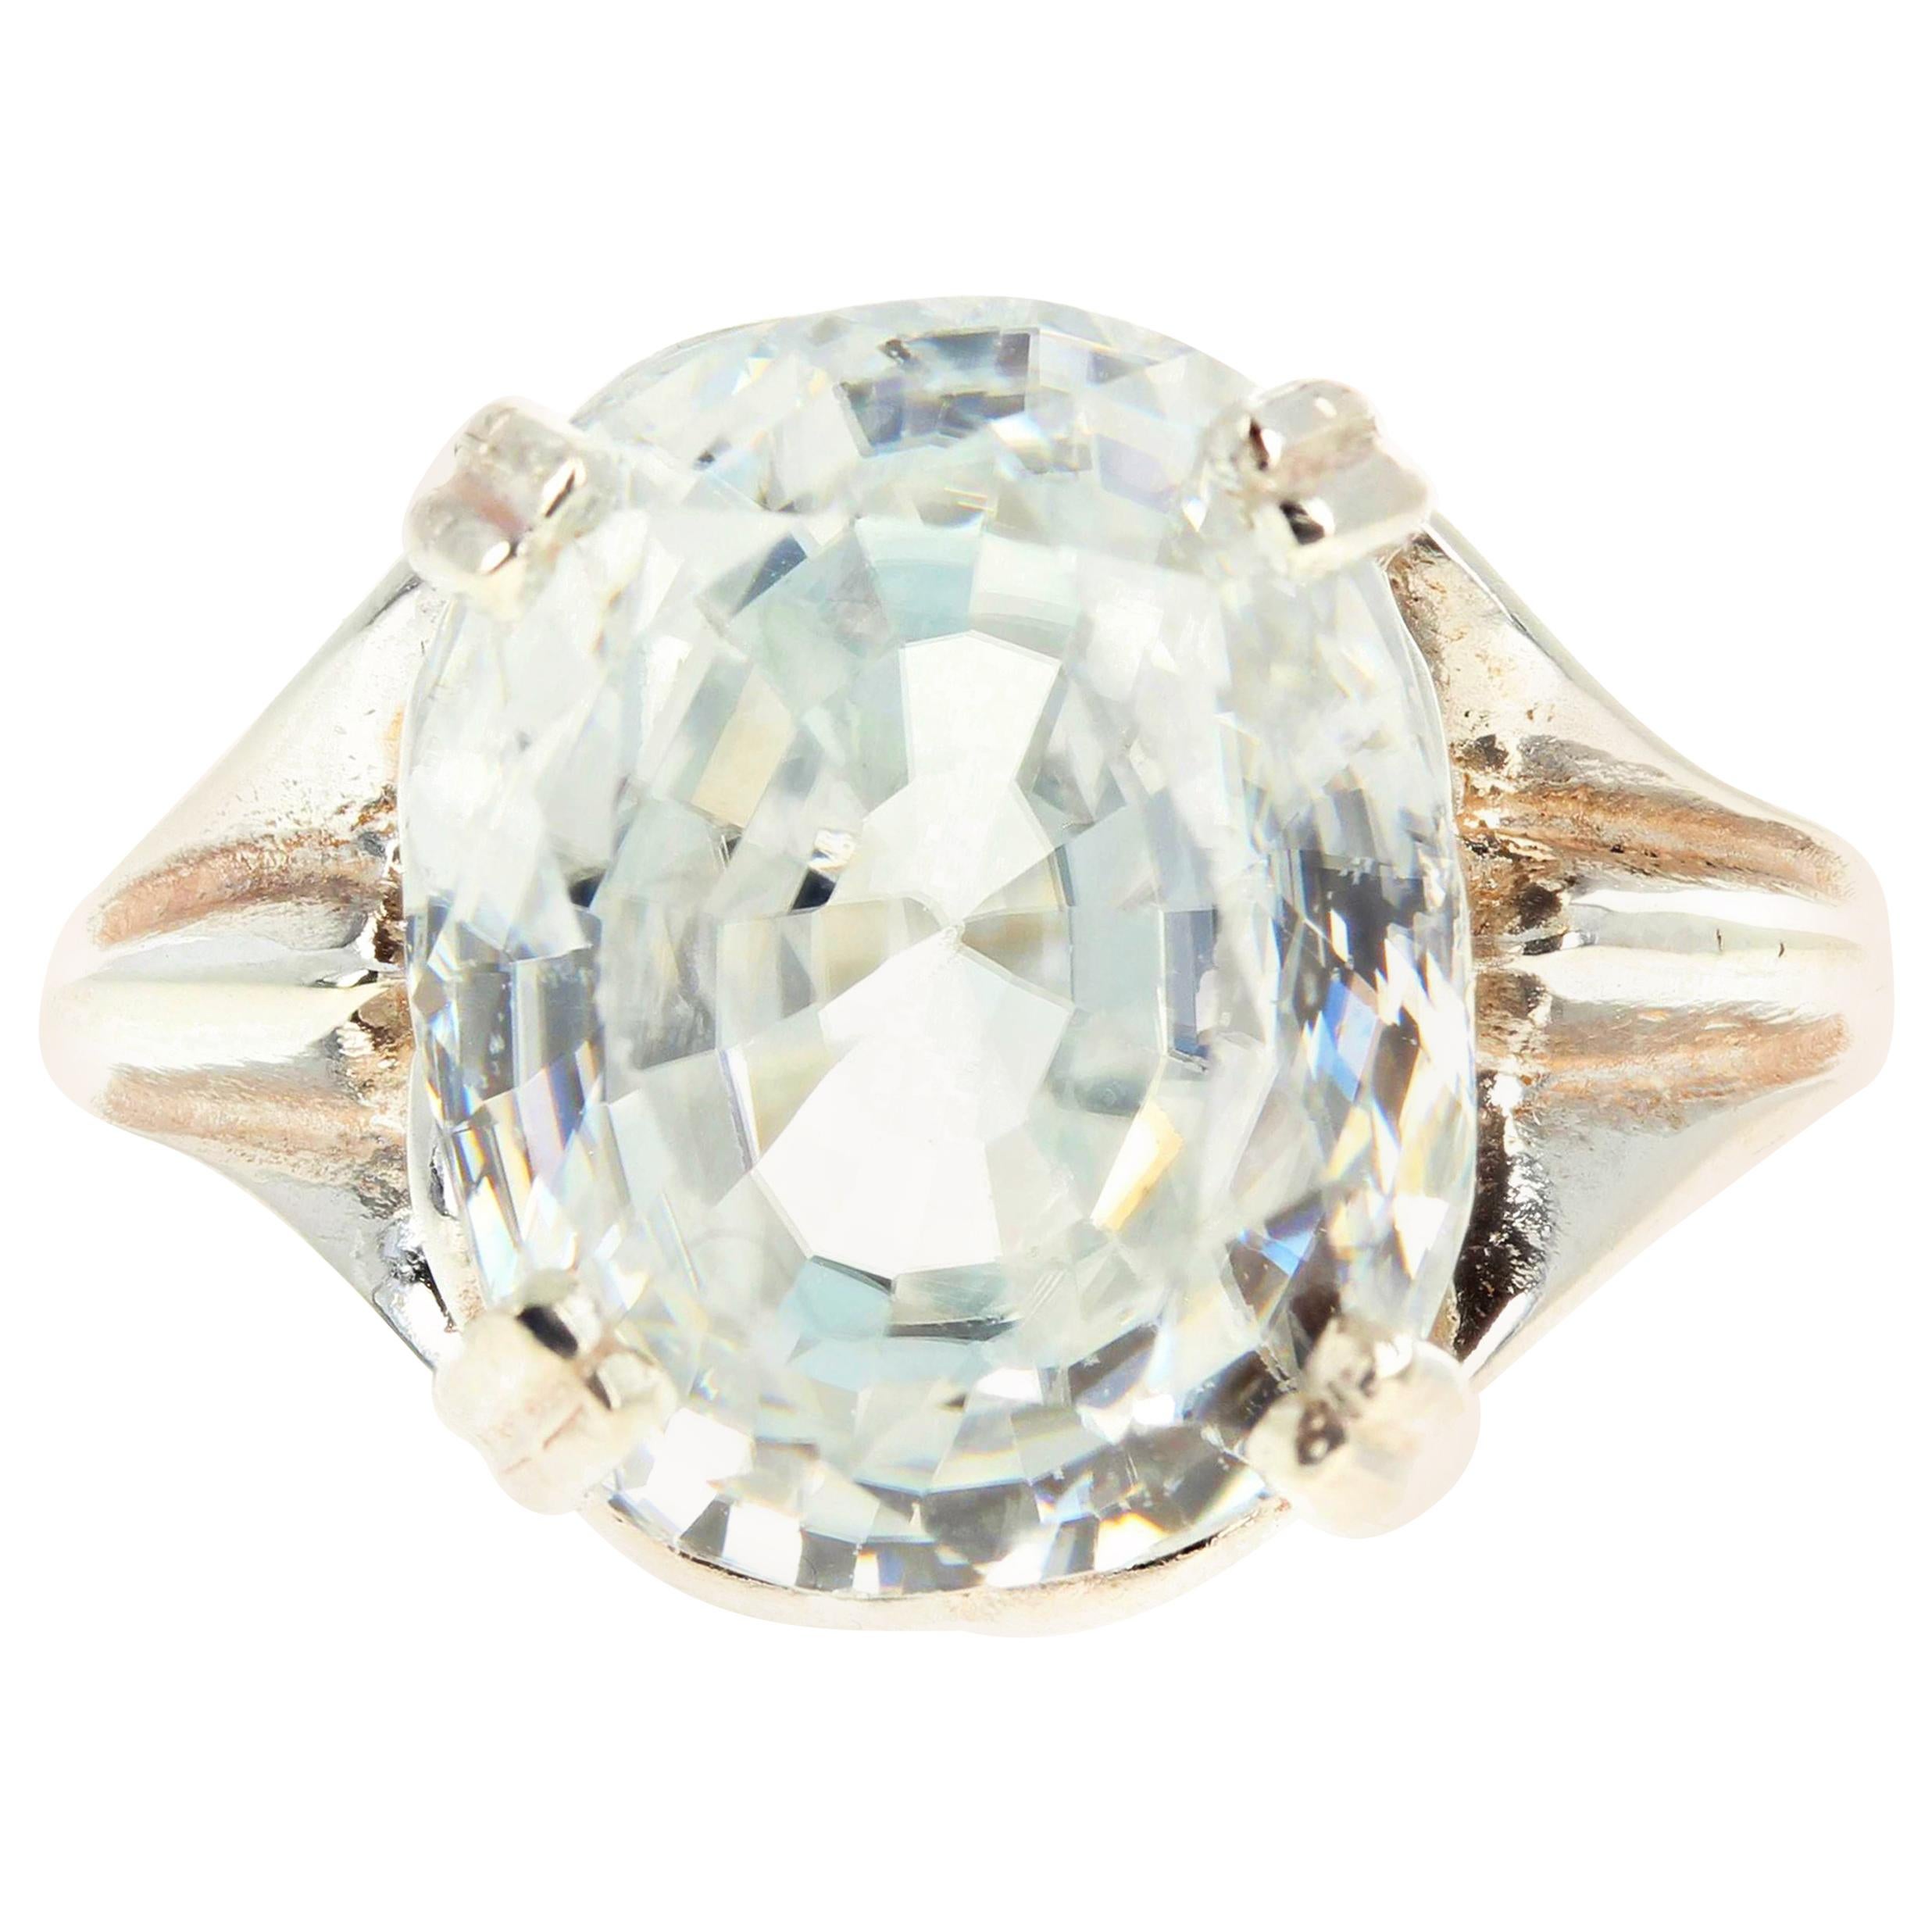 This gorgeous 14.6 mm x 12 mm glittering white natural Cambodian Zircon looks like a huge diamond on your hand !!  These 15.69 carats sit up brilliantly on this sterling silver ring size 7 (sizable).  There are no eye visible inclusions in this